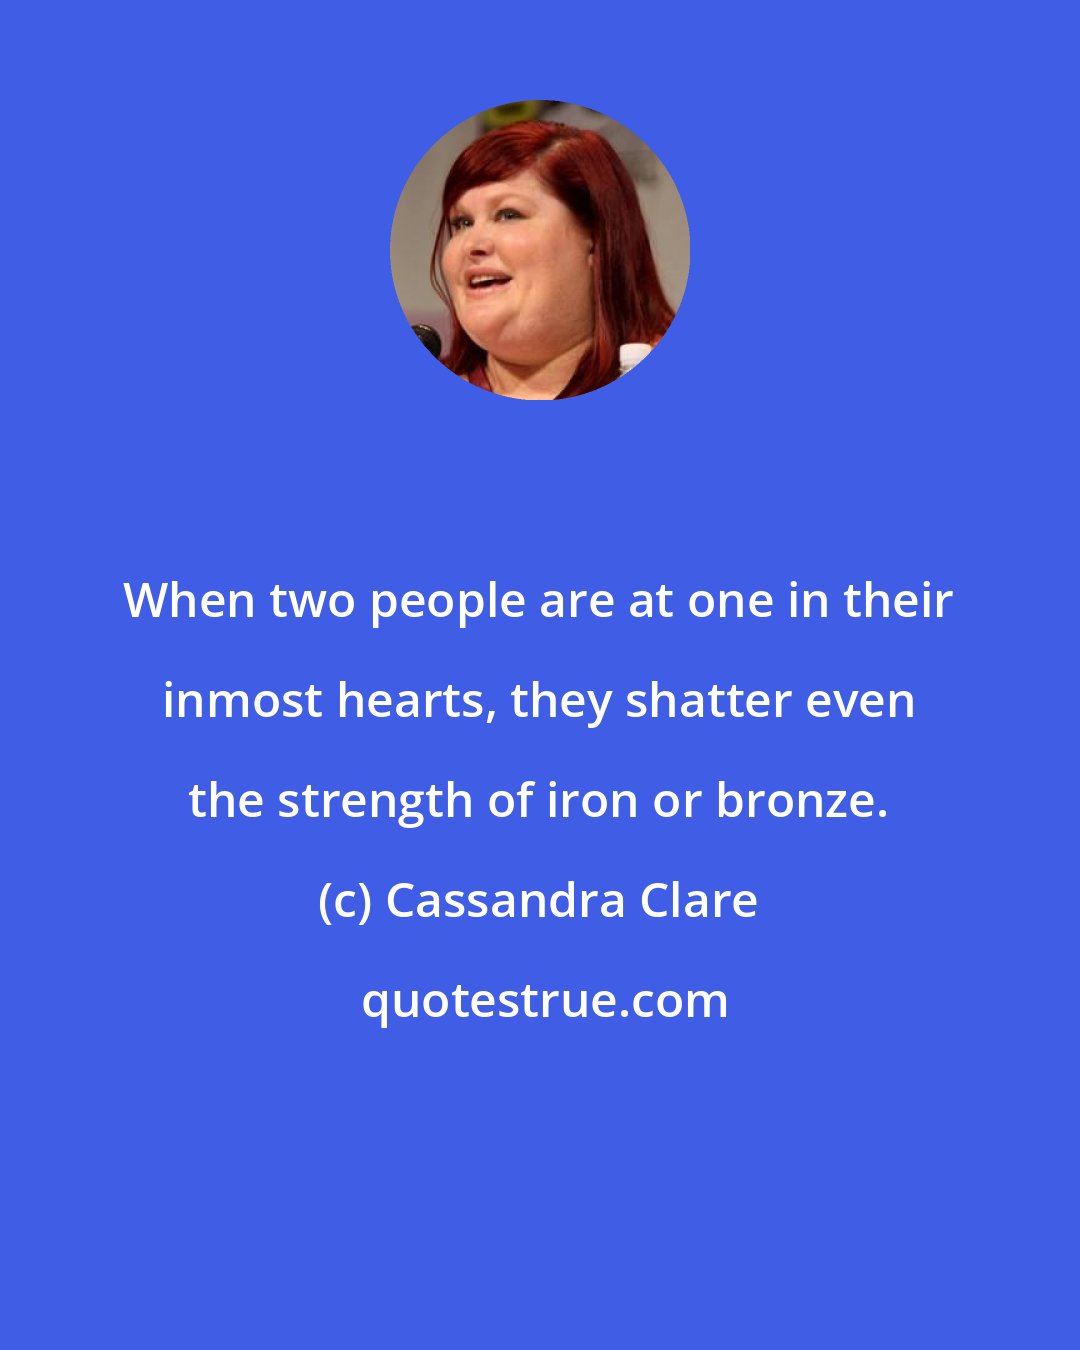 Cassandra Clare: When two people are at one in their inmost hearts, they shatter even the strength of iron or bronze.